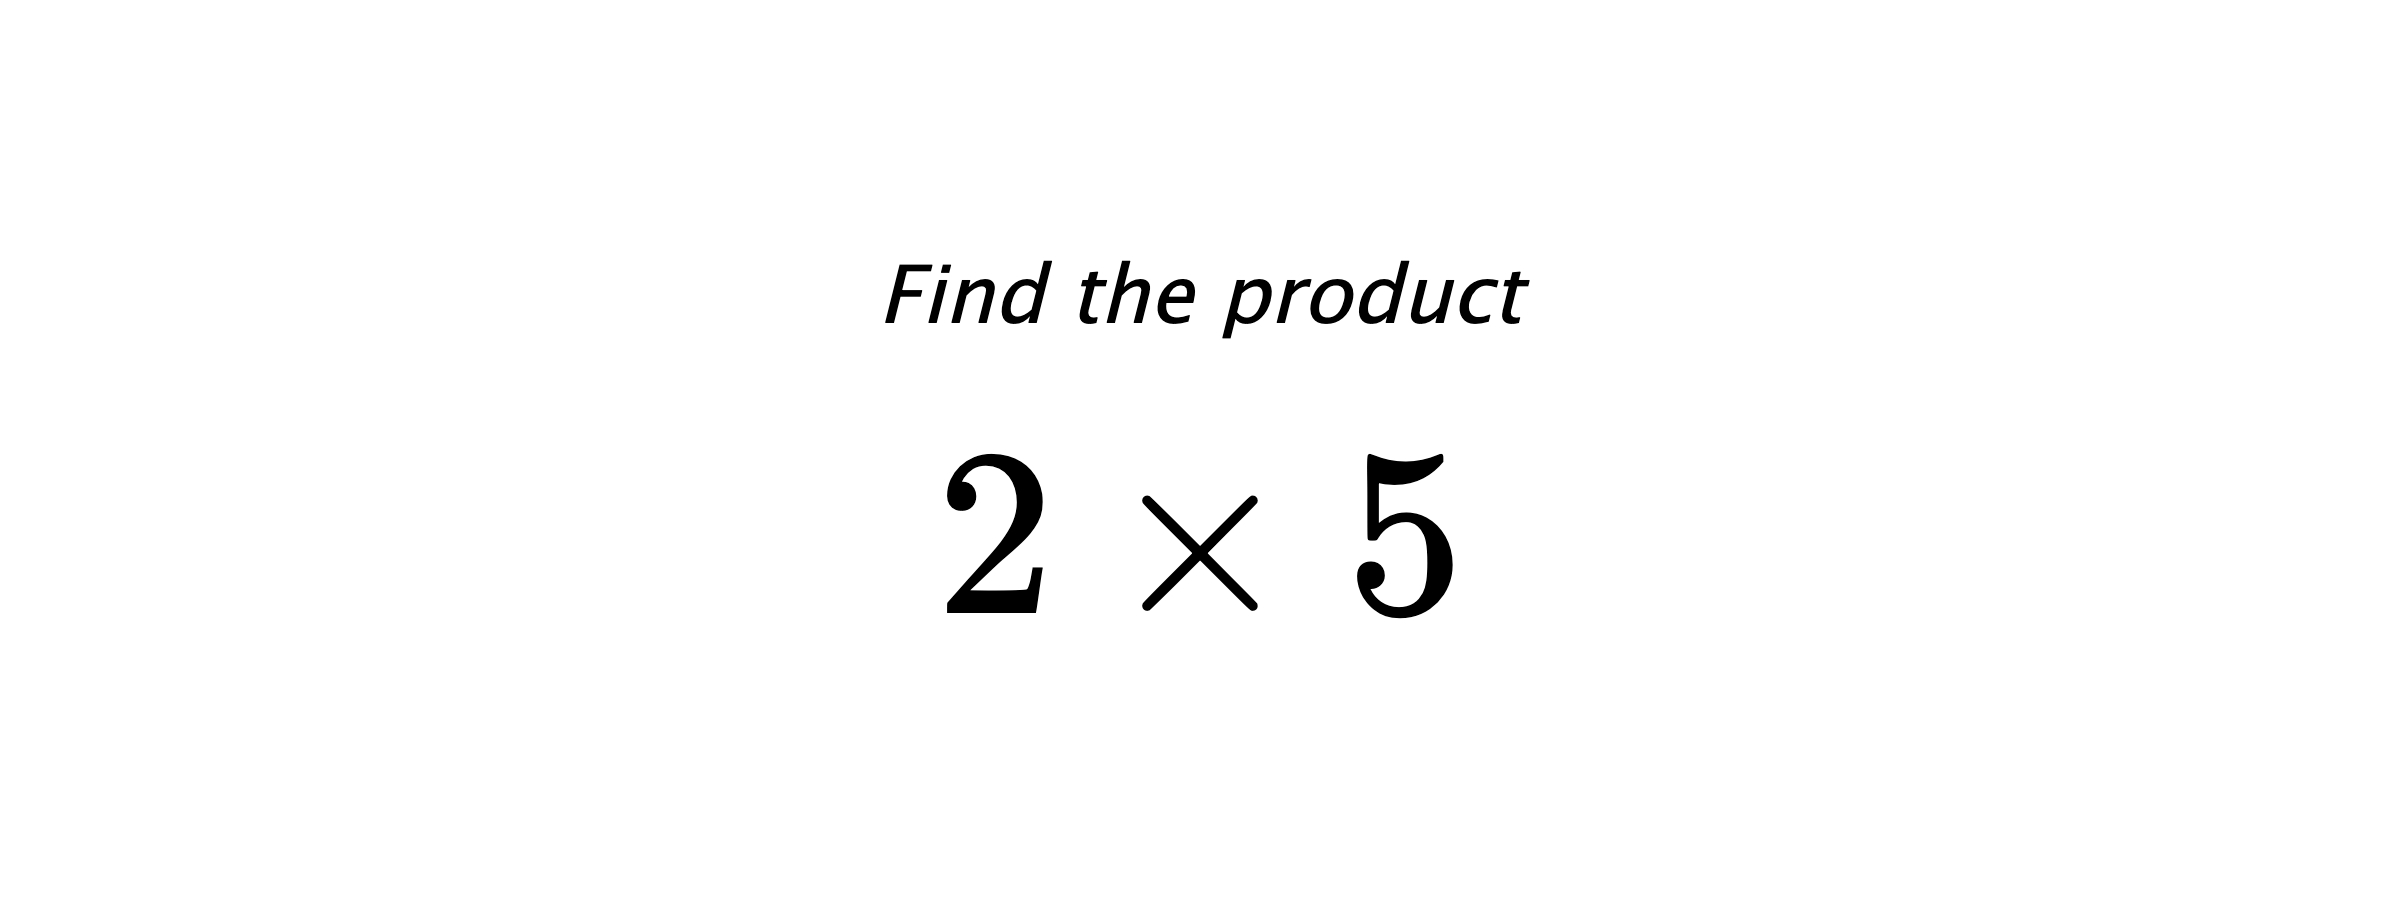 Find the product $ 2 \times 5 $